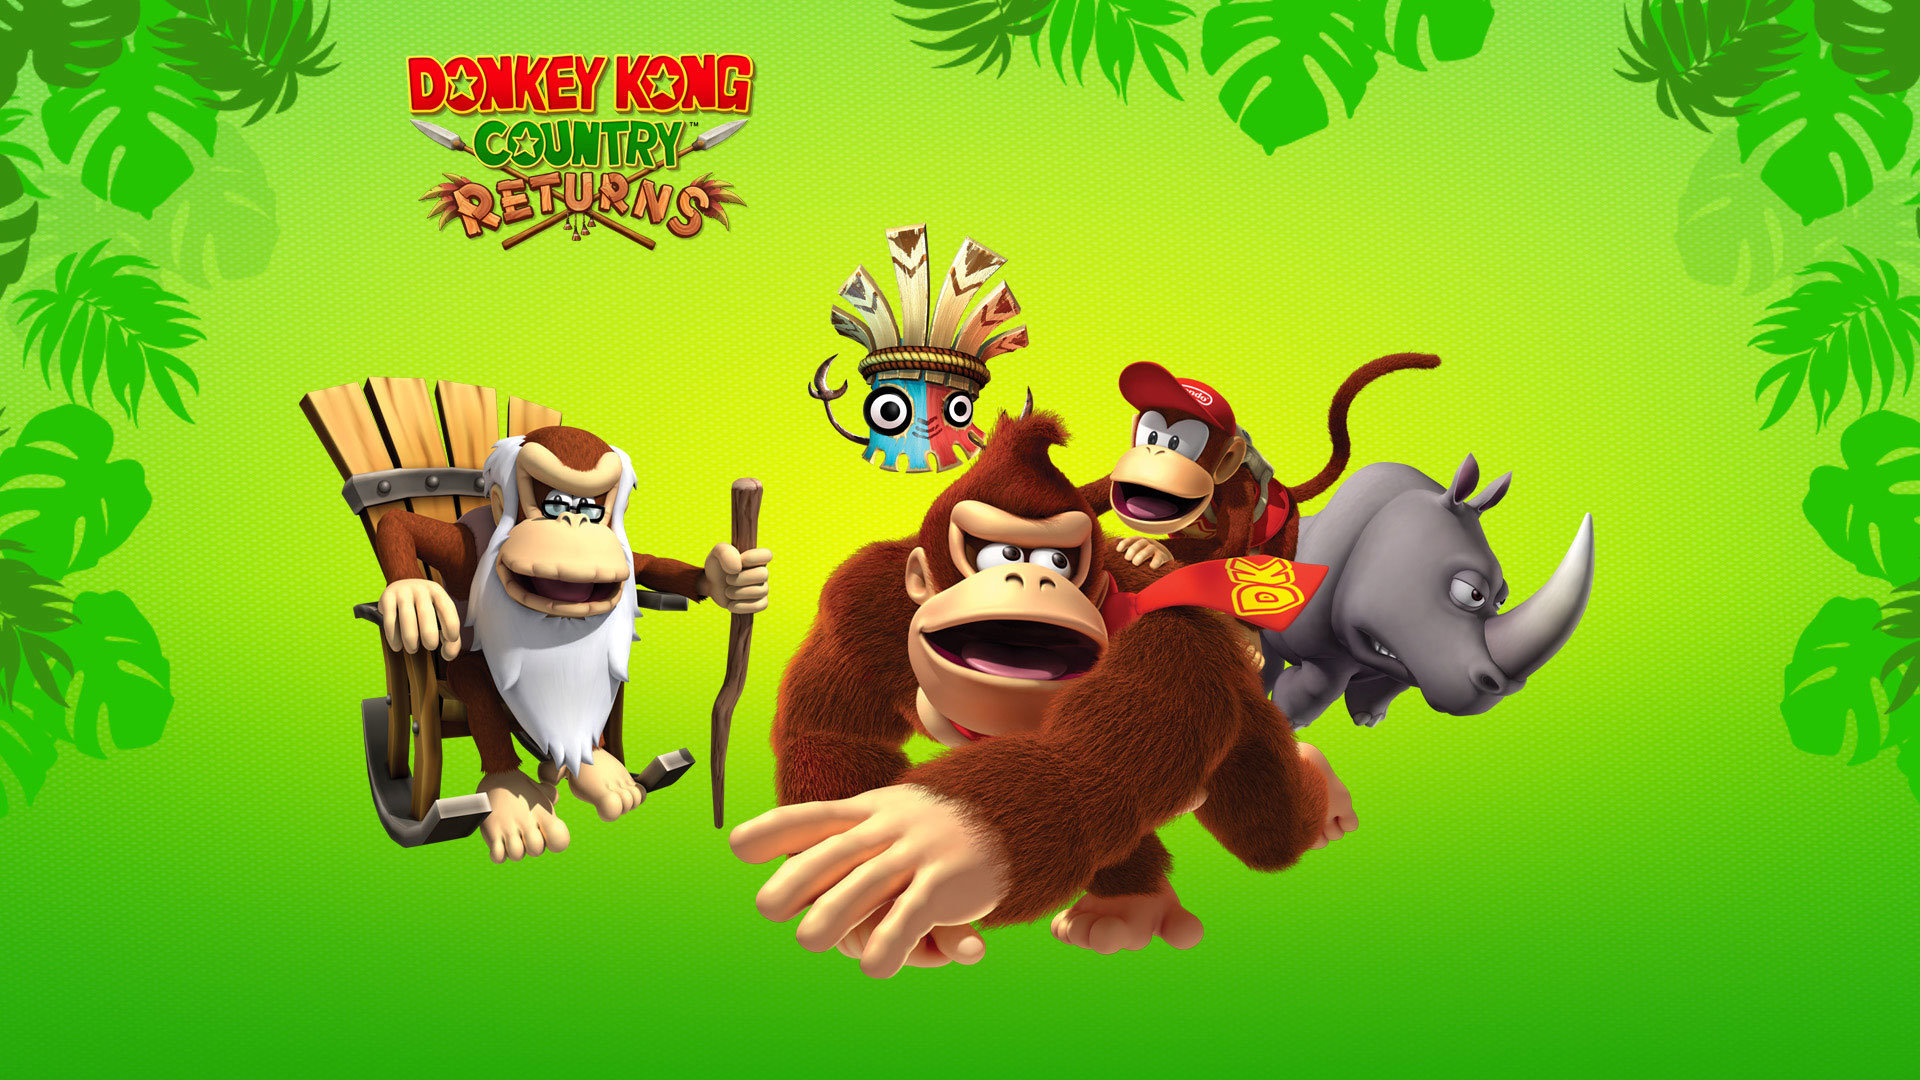 Best Donkey Kong Country Returns wallpaper ID:62495 for High Resolution hd 1920x1080 computer